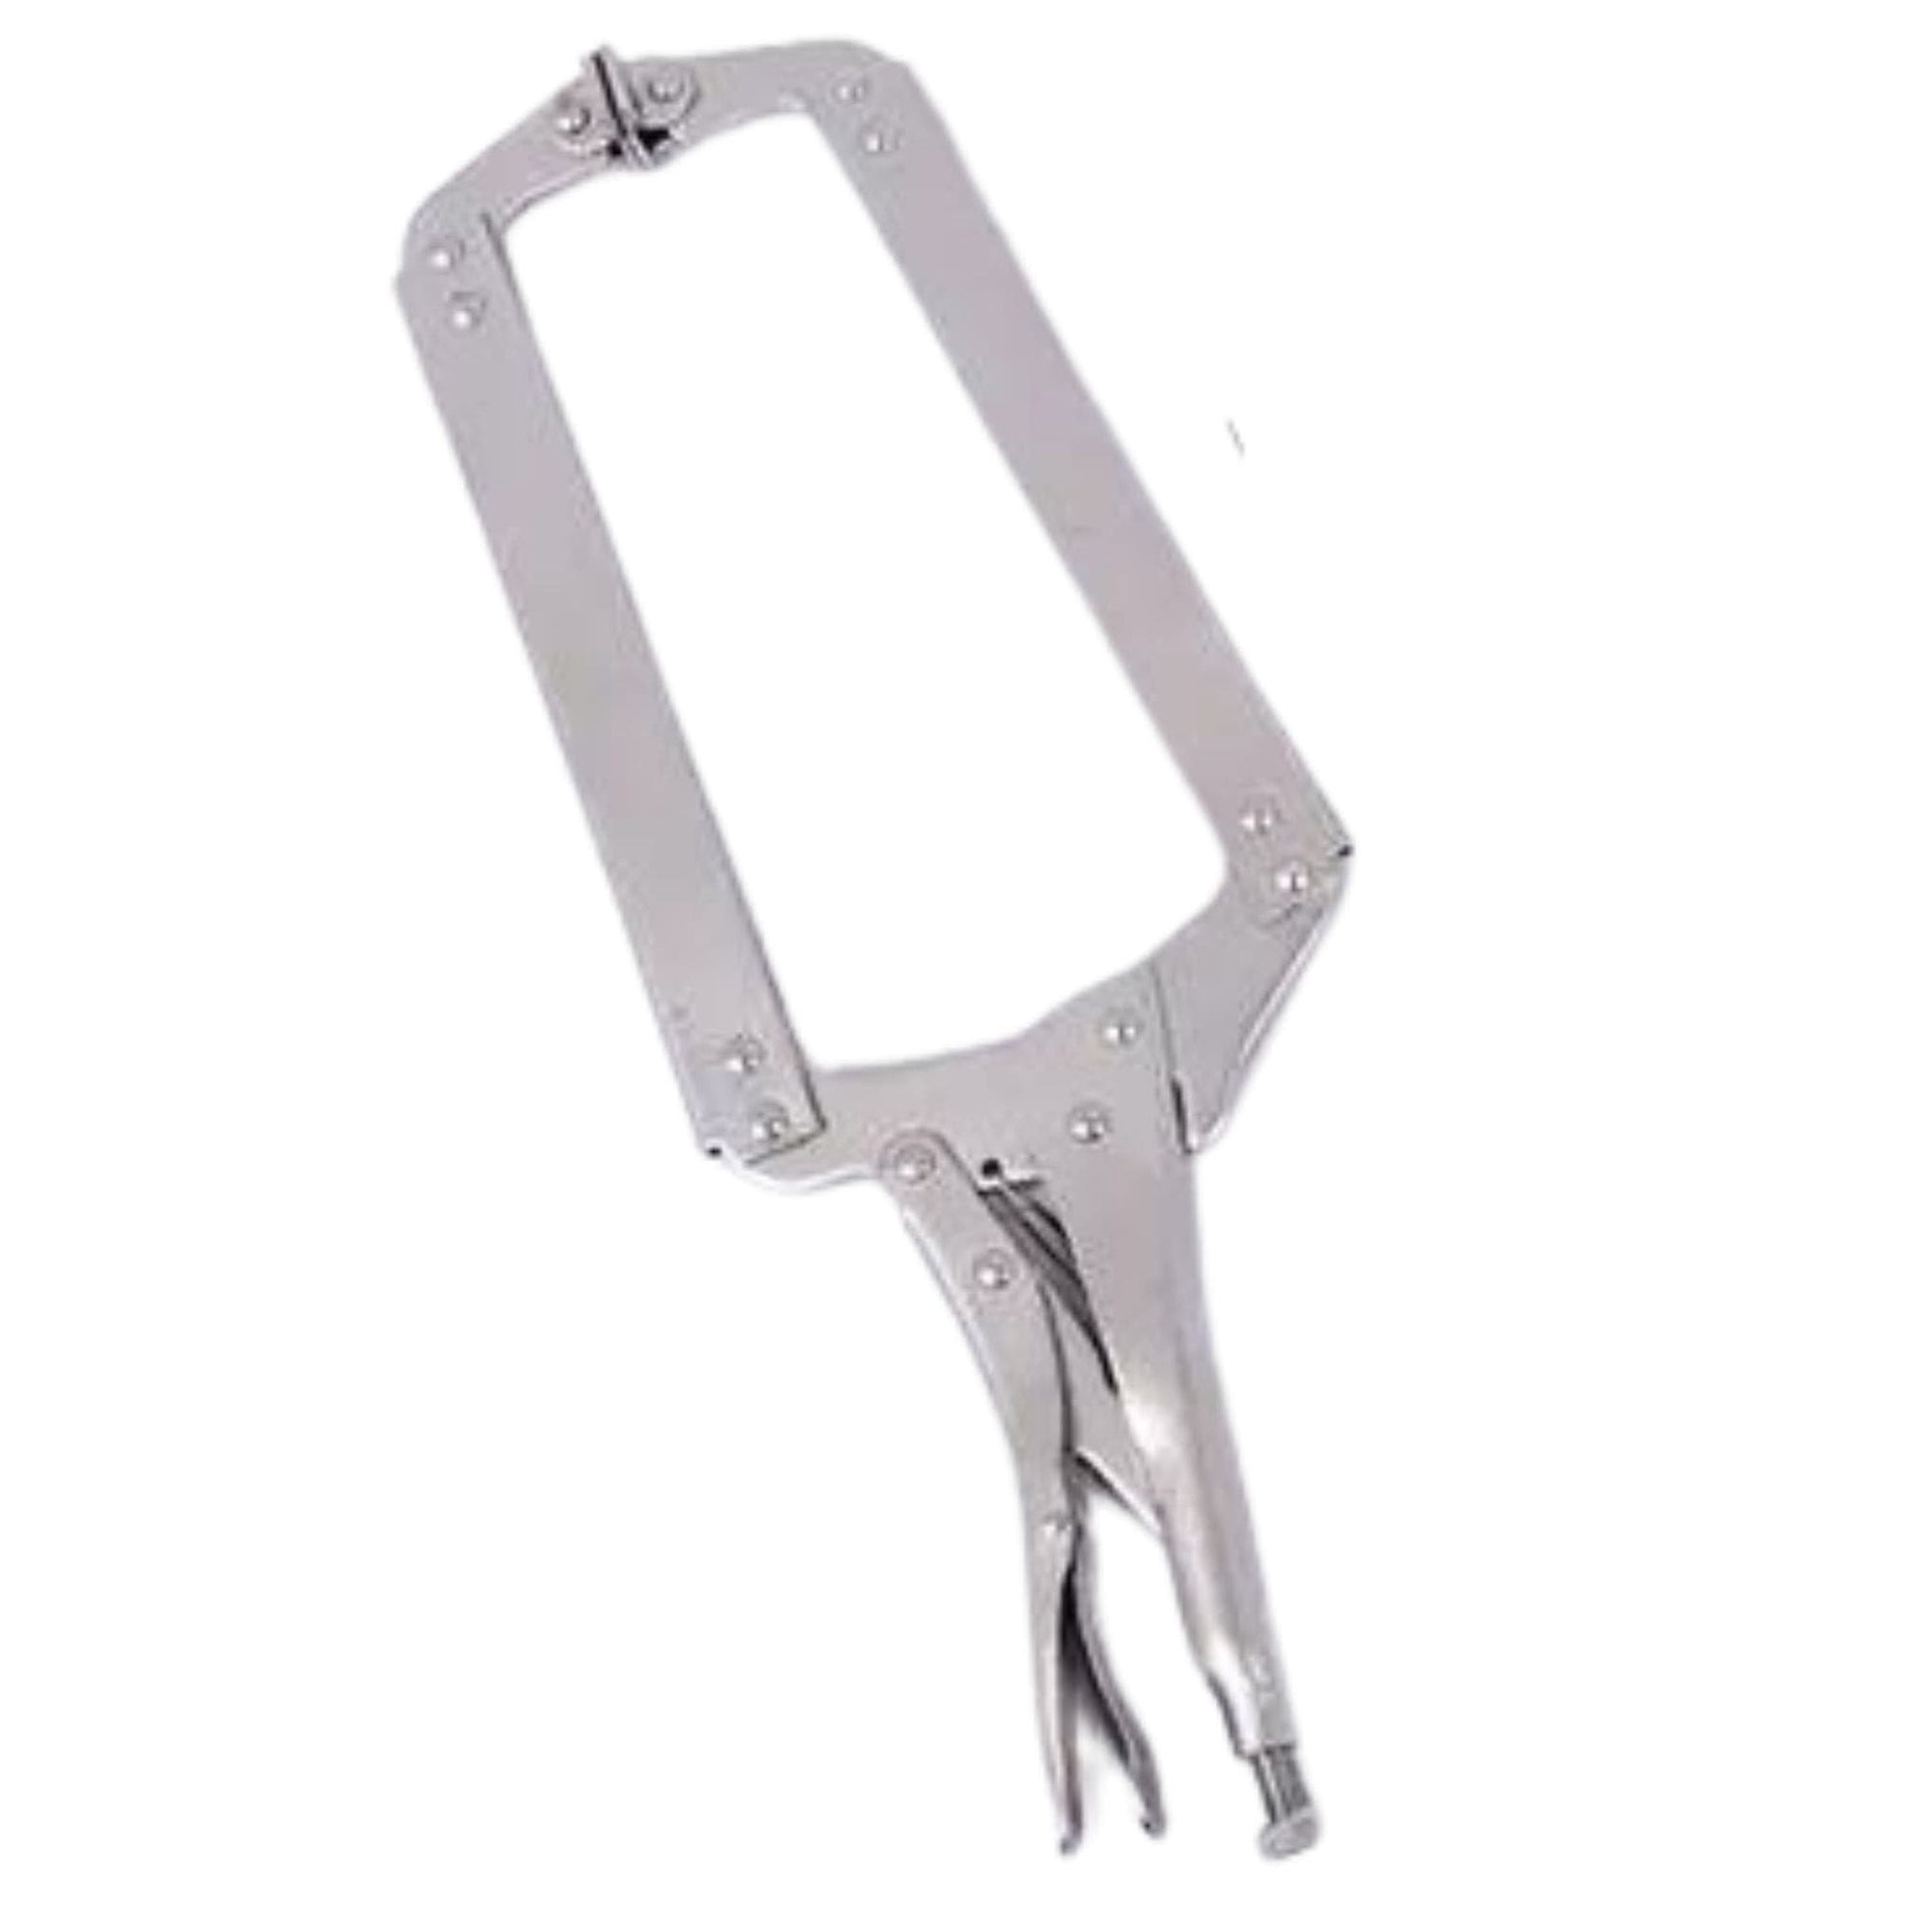 17” welding locking pliers c clamp - South East Clearance Centre